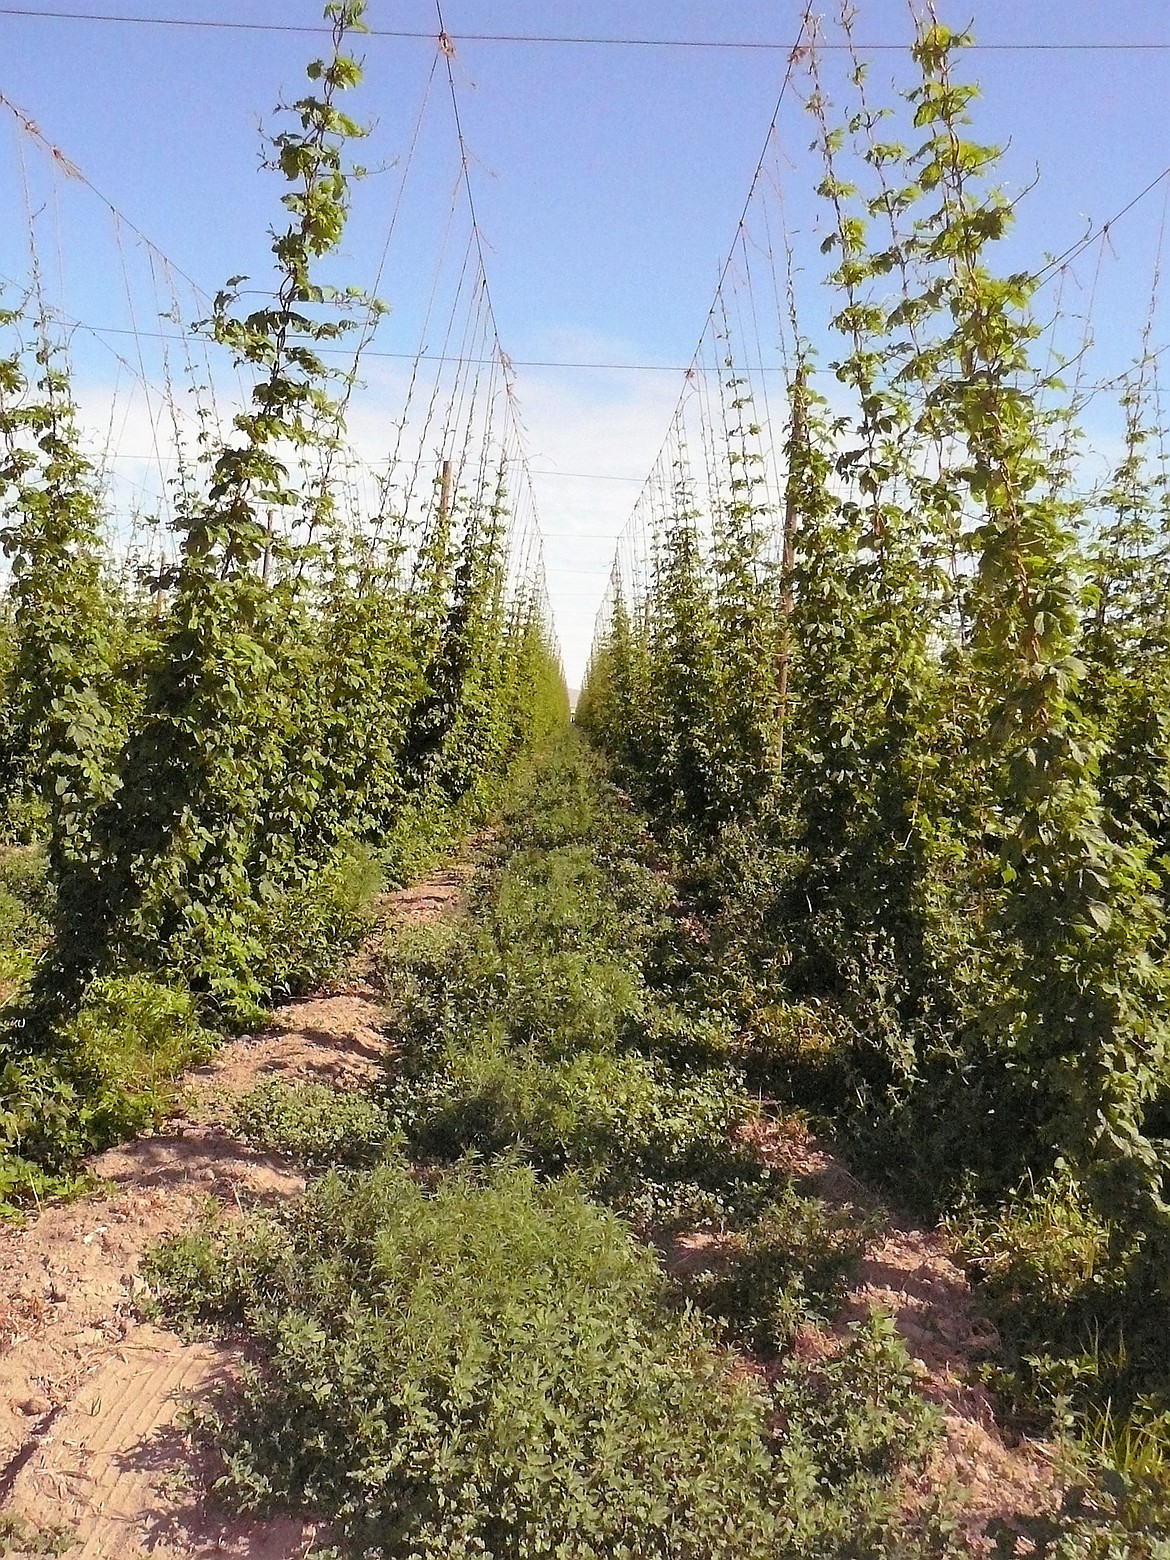 JERRY HITCHCOCK/Press
Hops are found in abundance in the Yakima Valley.